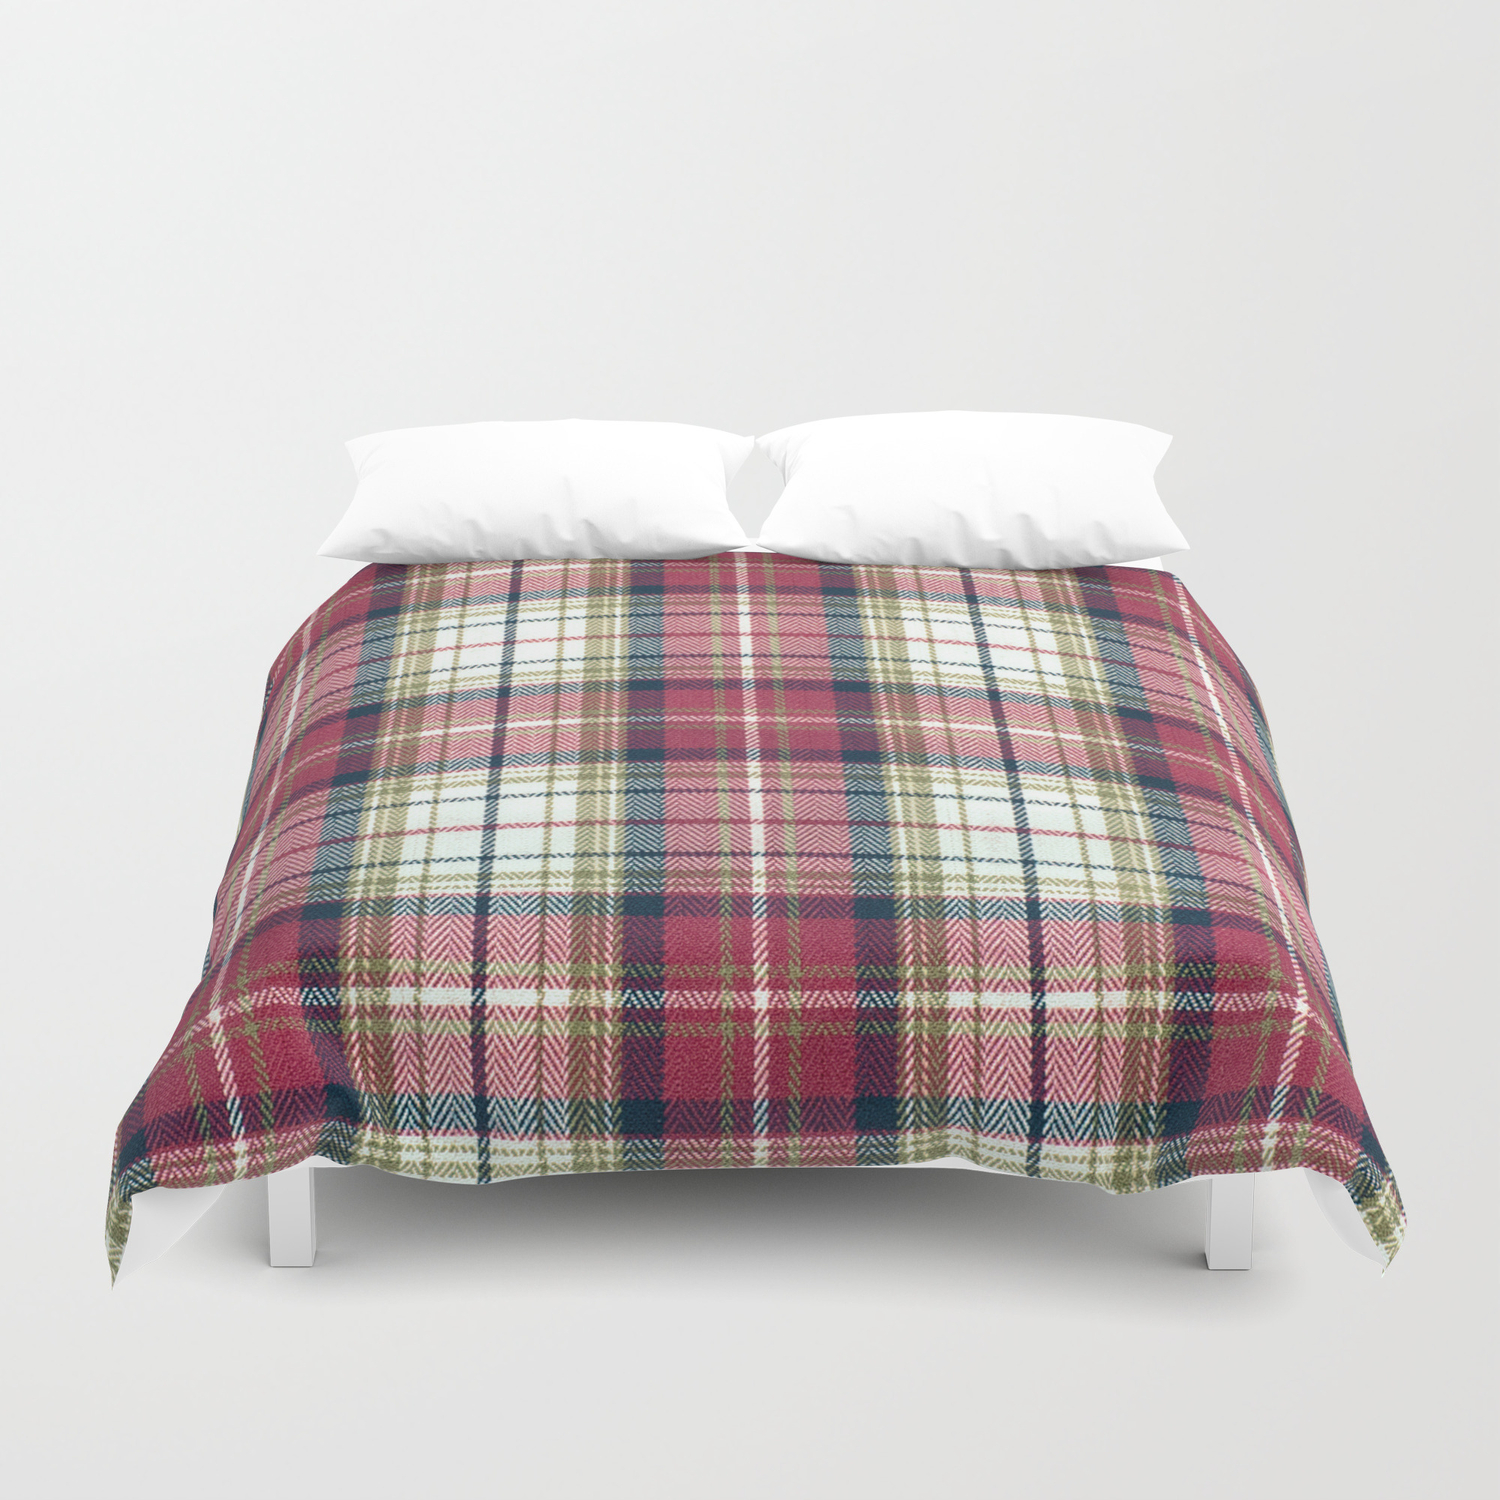 Plaid Fabic Print In Red White Tan And Navy Duvet Cover By